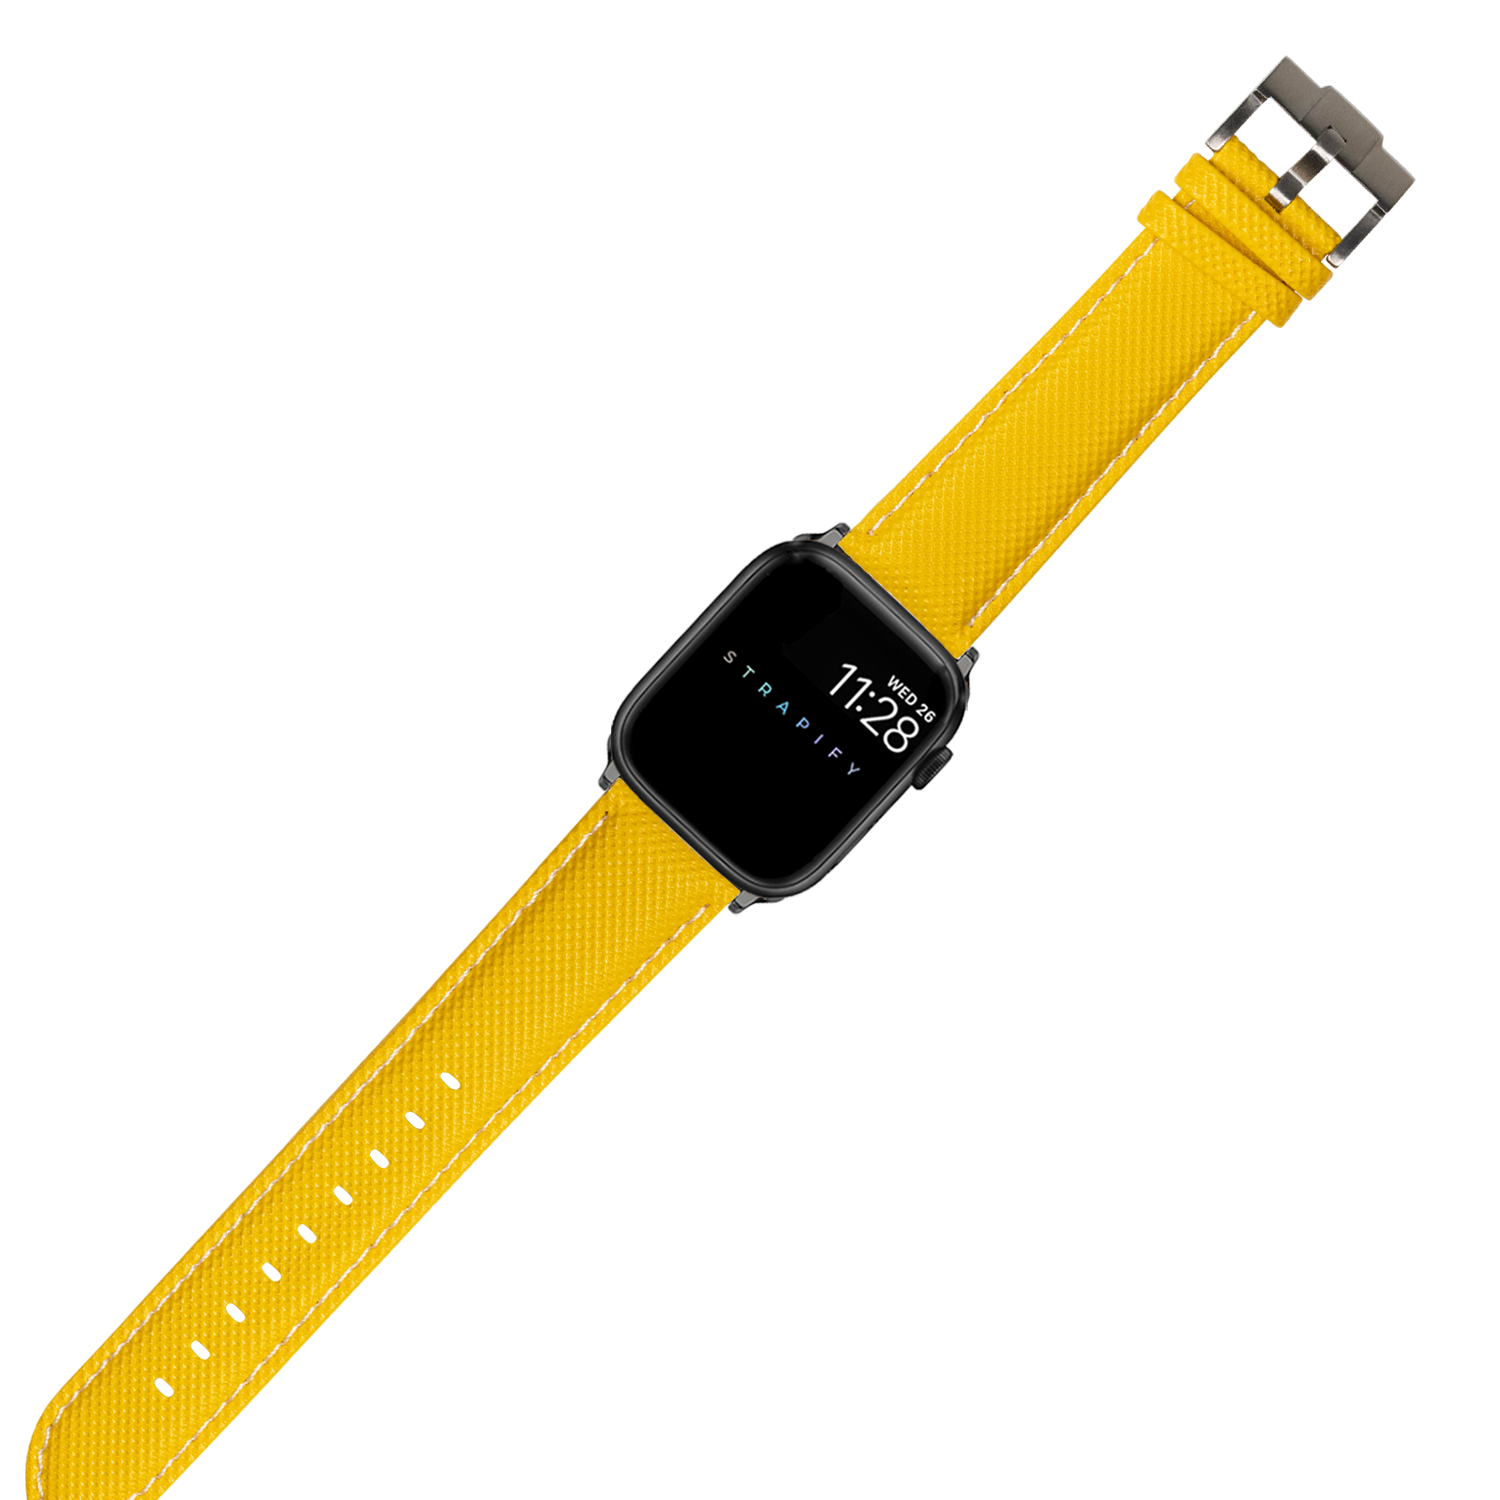 [Apple Watch] Sailcloth - Yellow with White Stitching